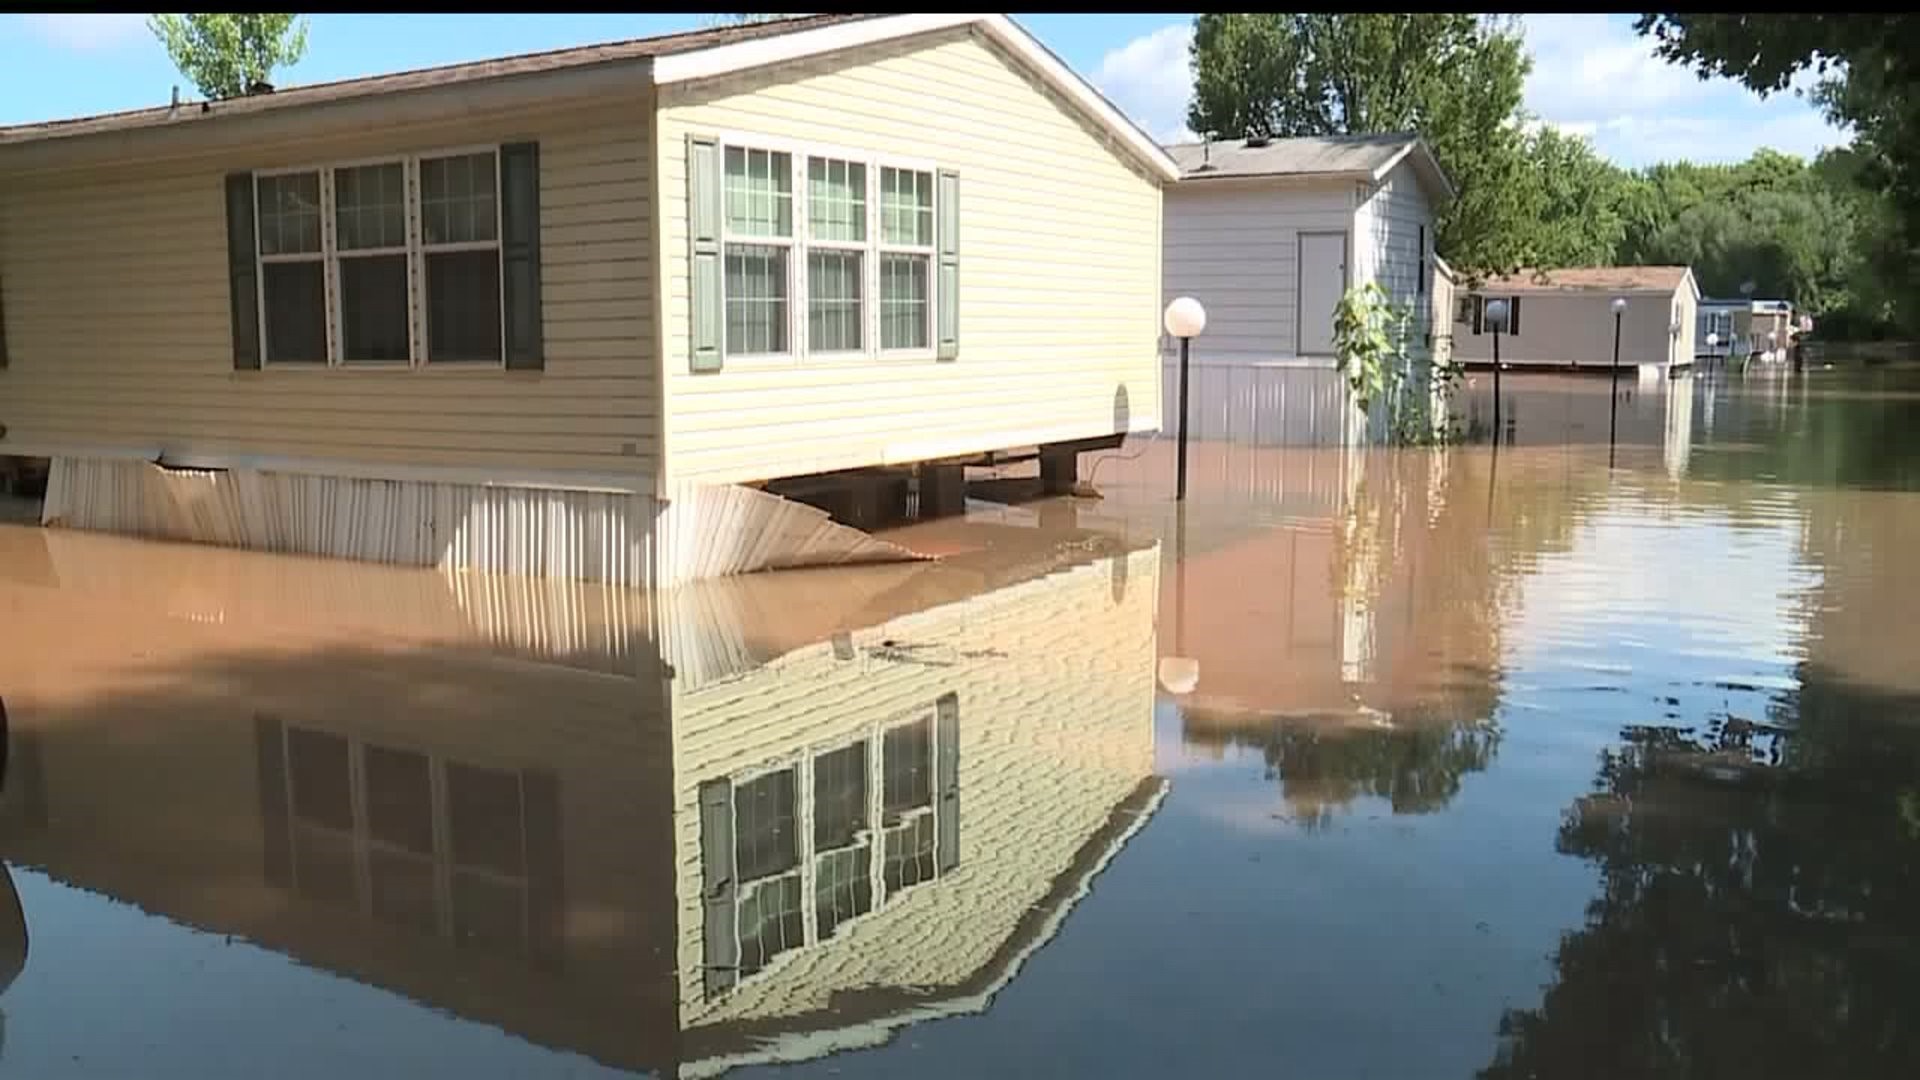 Mobile home park in Highspire hit with flooding  What are the residents going to do next?